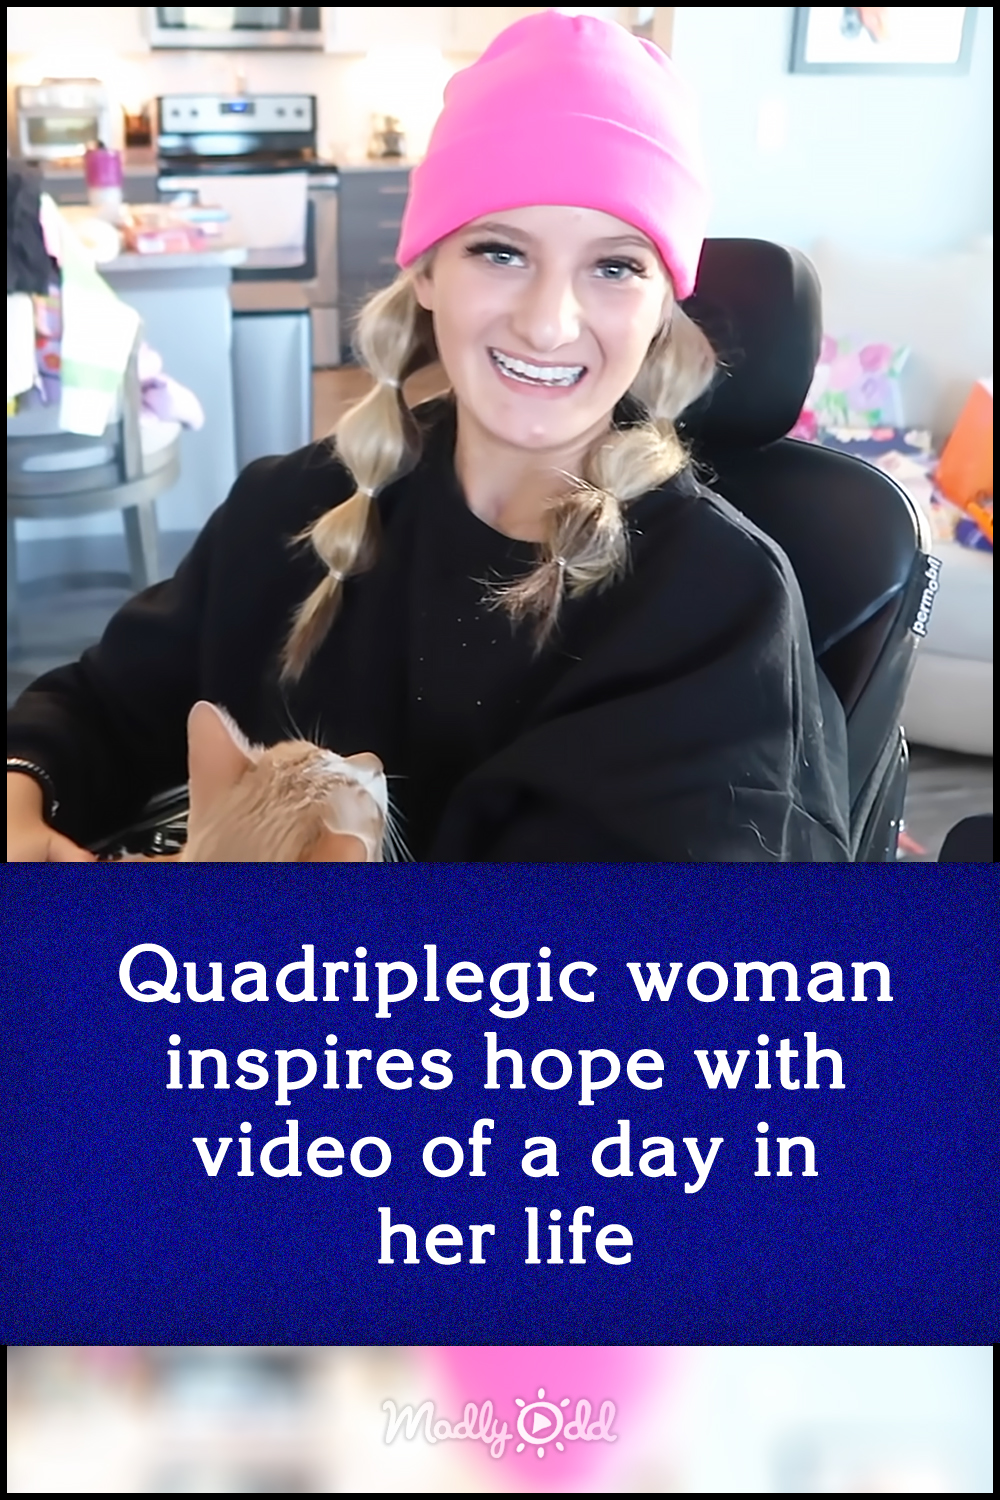 Quadriplegic woman inspires hope with video of a day in her life